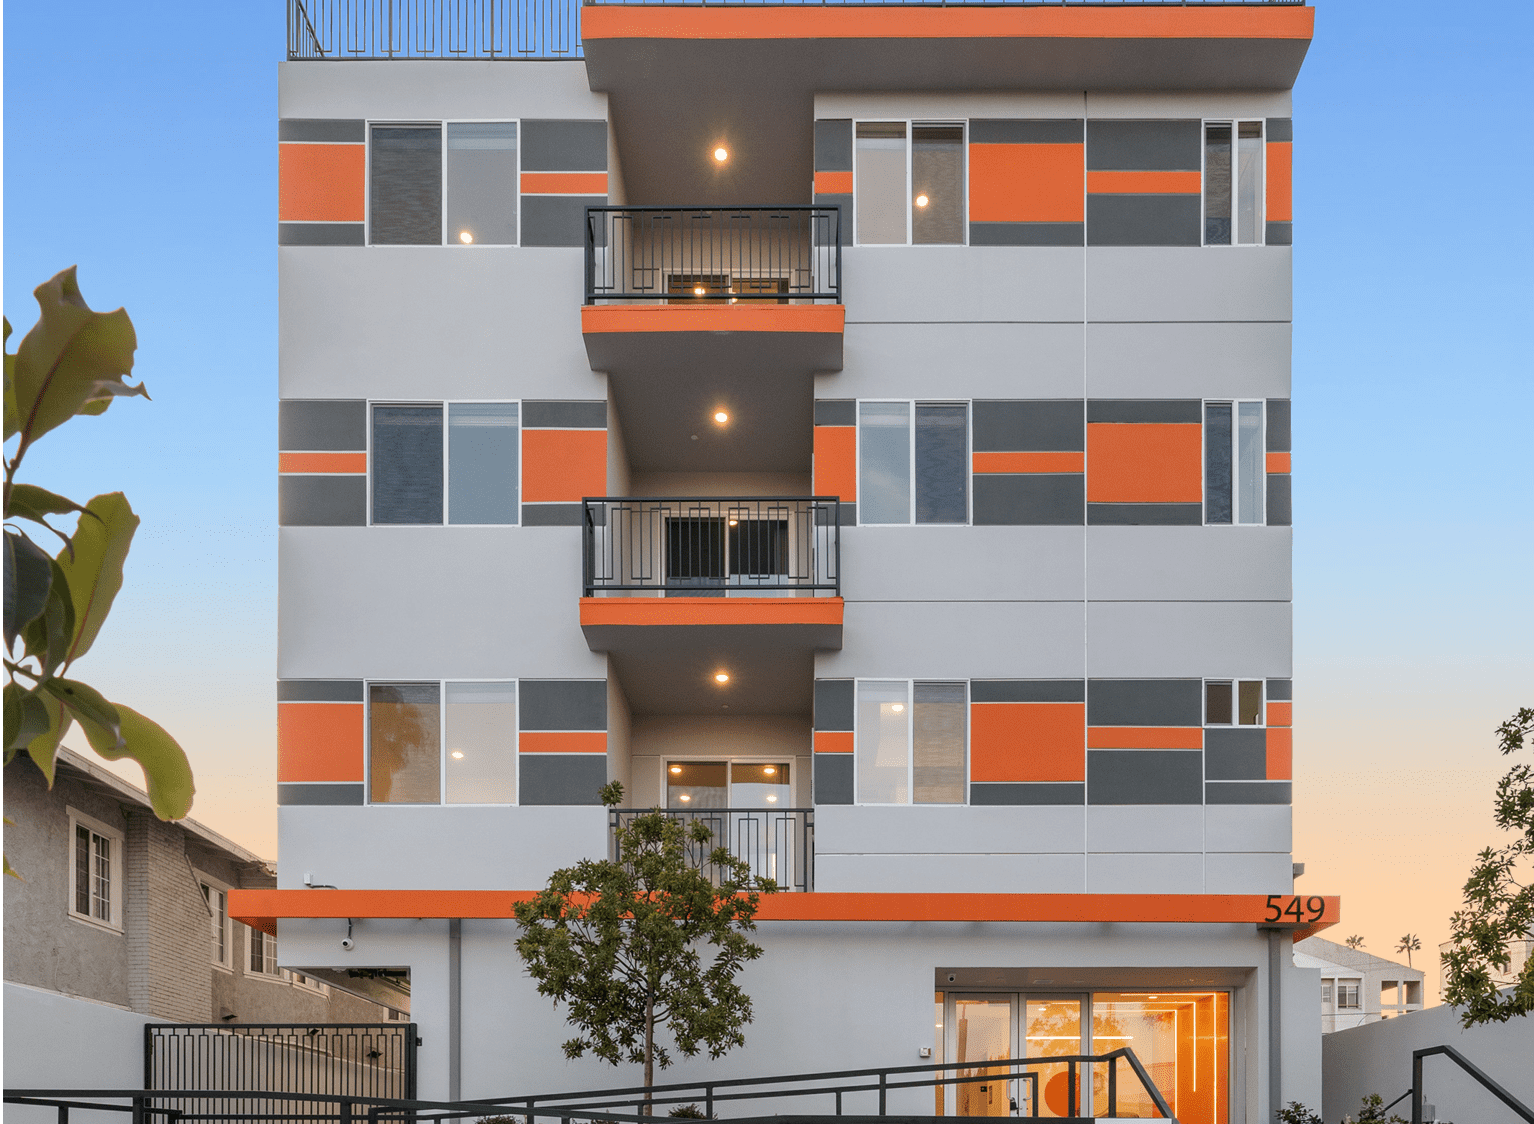 Townhomes for rent in Koreatown